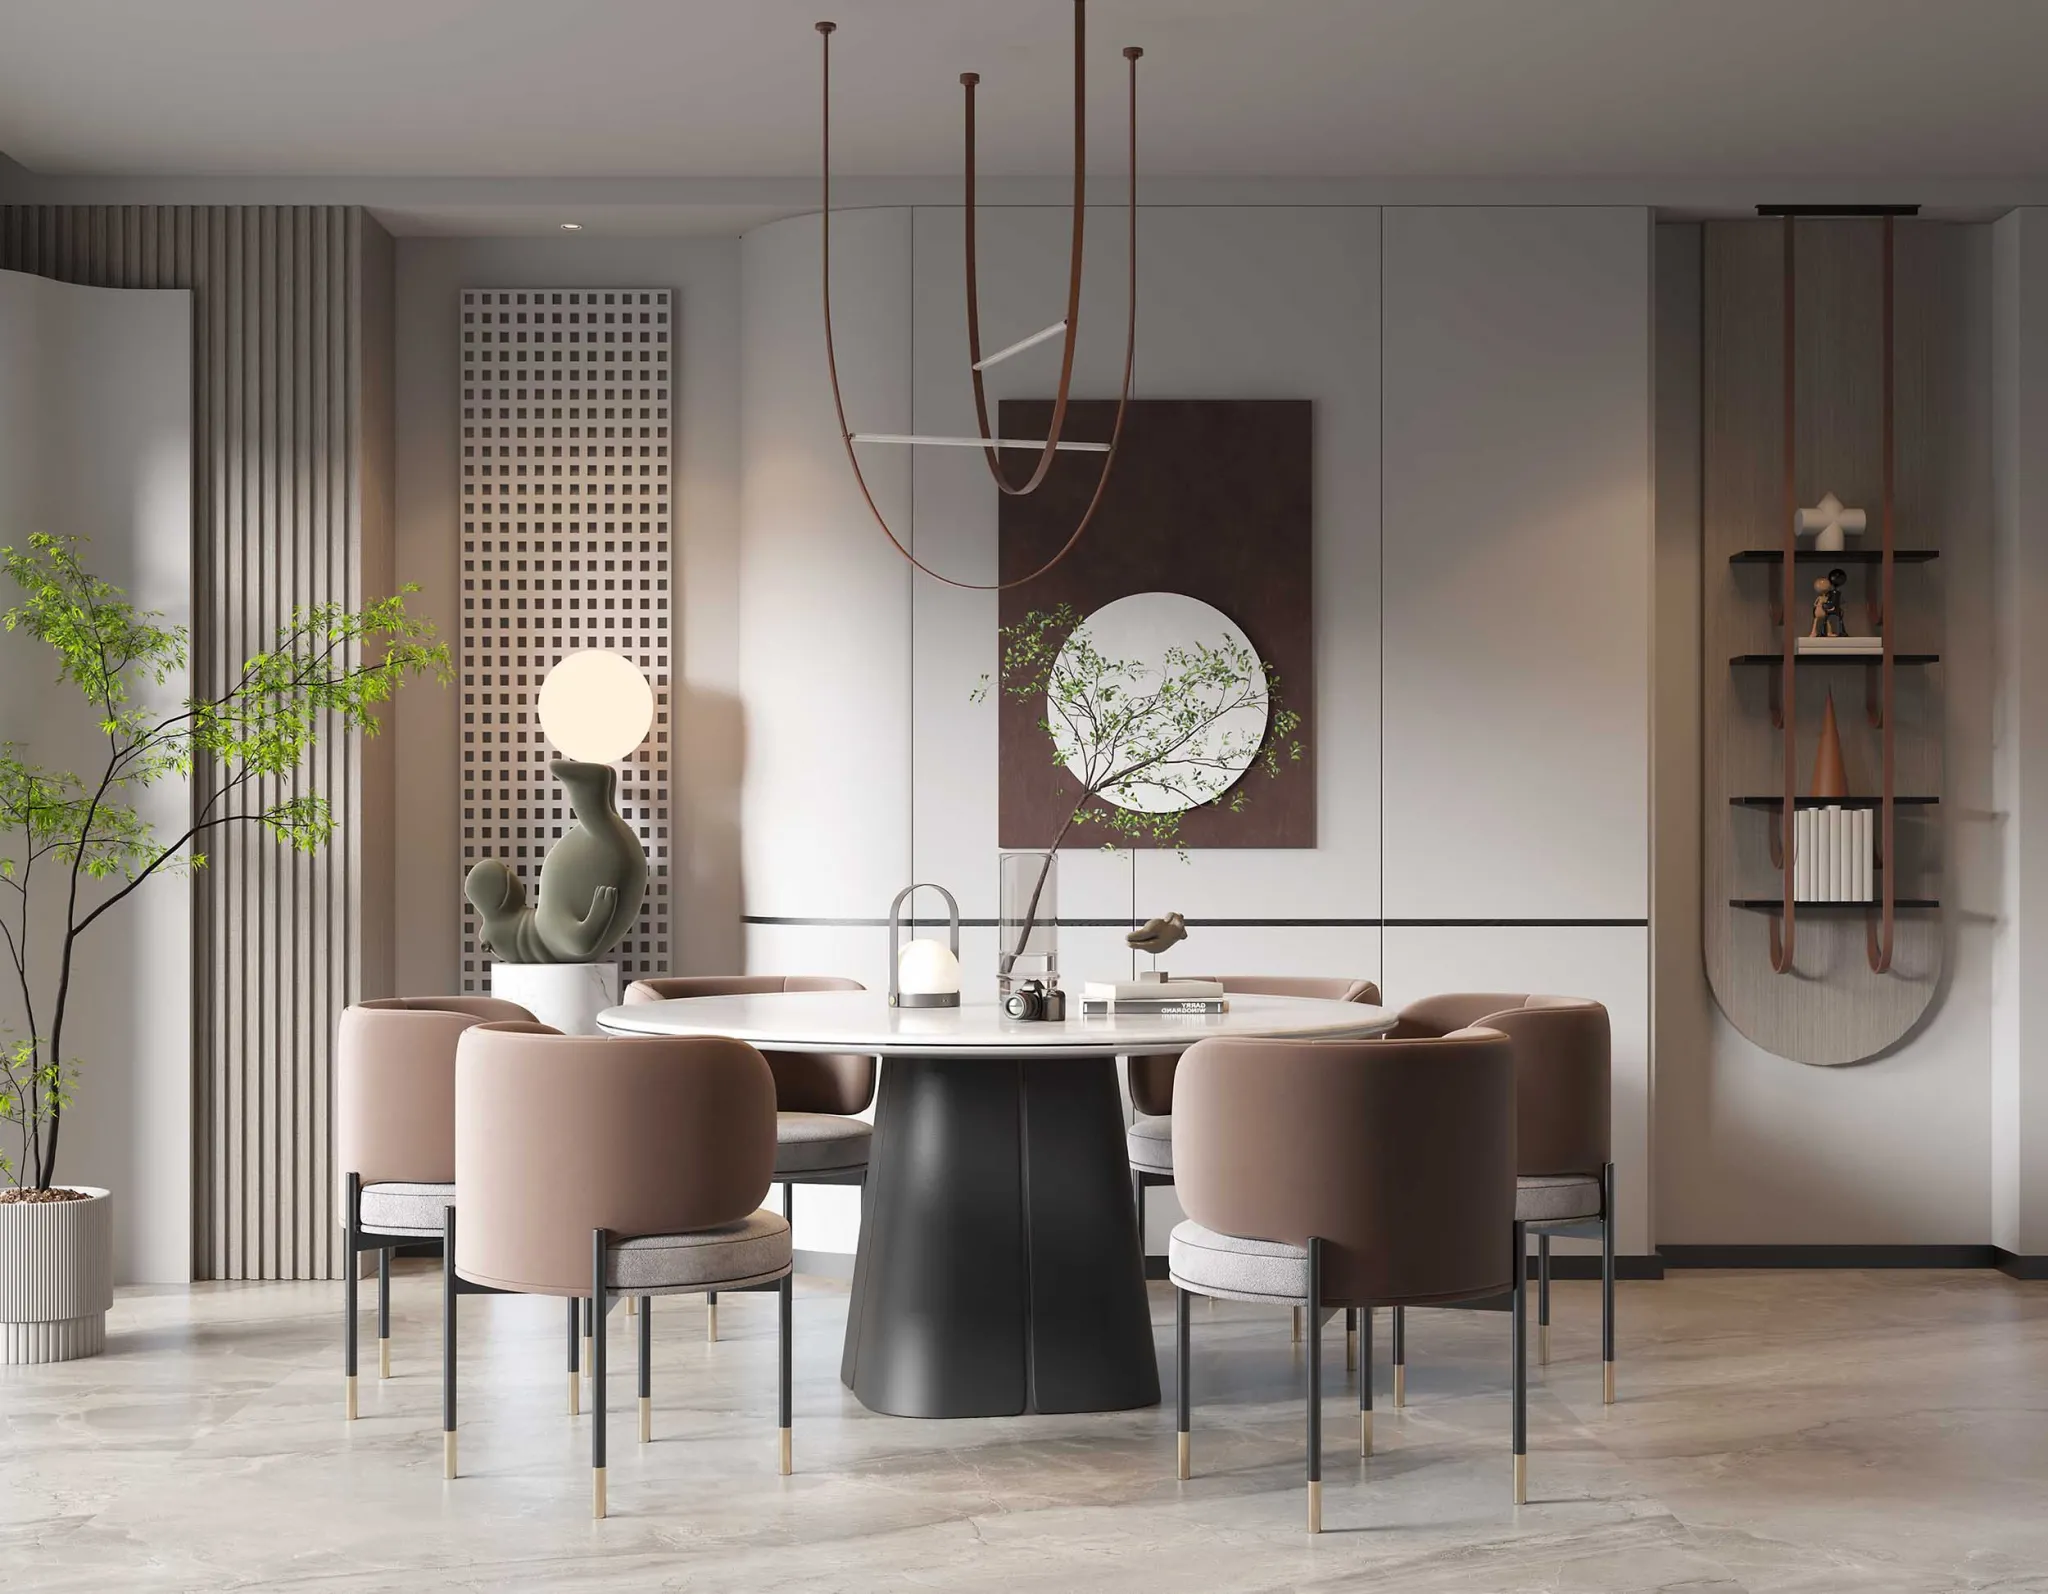 HOUSE SPACE 3D SCENES – DINING ROOM – 0018